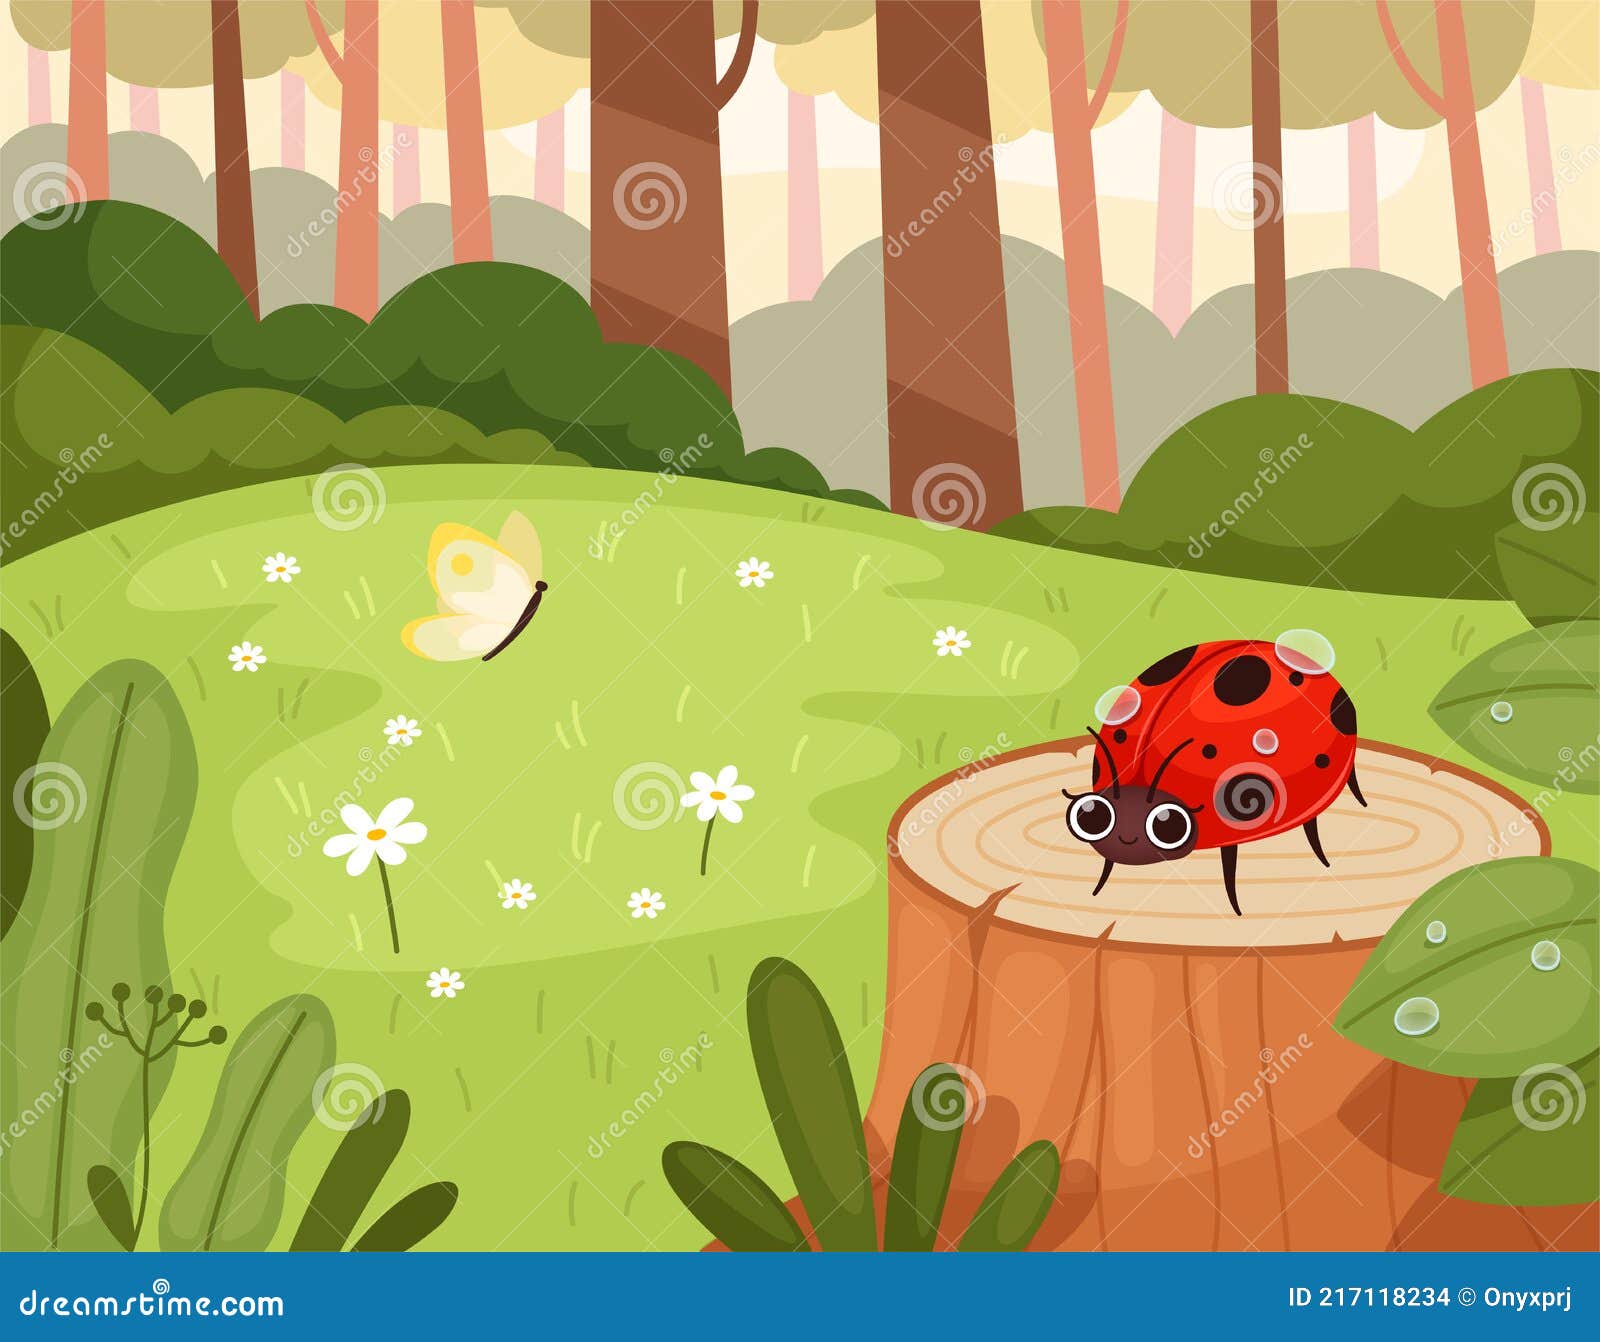 Ladybug in Wood. Green Natural Park with Funny Insects Warm Garden Outdoor  Cartoon Background Nowaday Vector Funny Stock Vector - Illustration of  forest, vector: 217118234